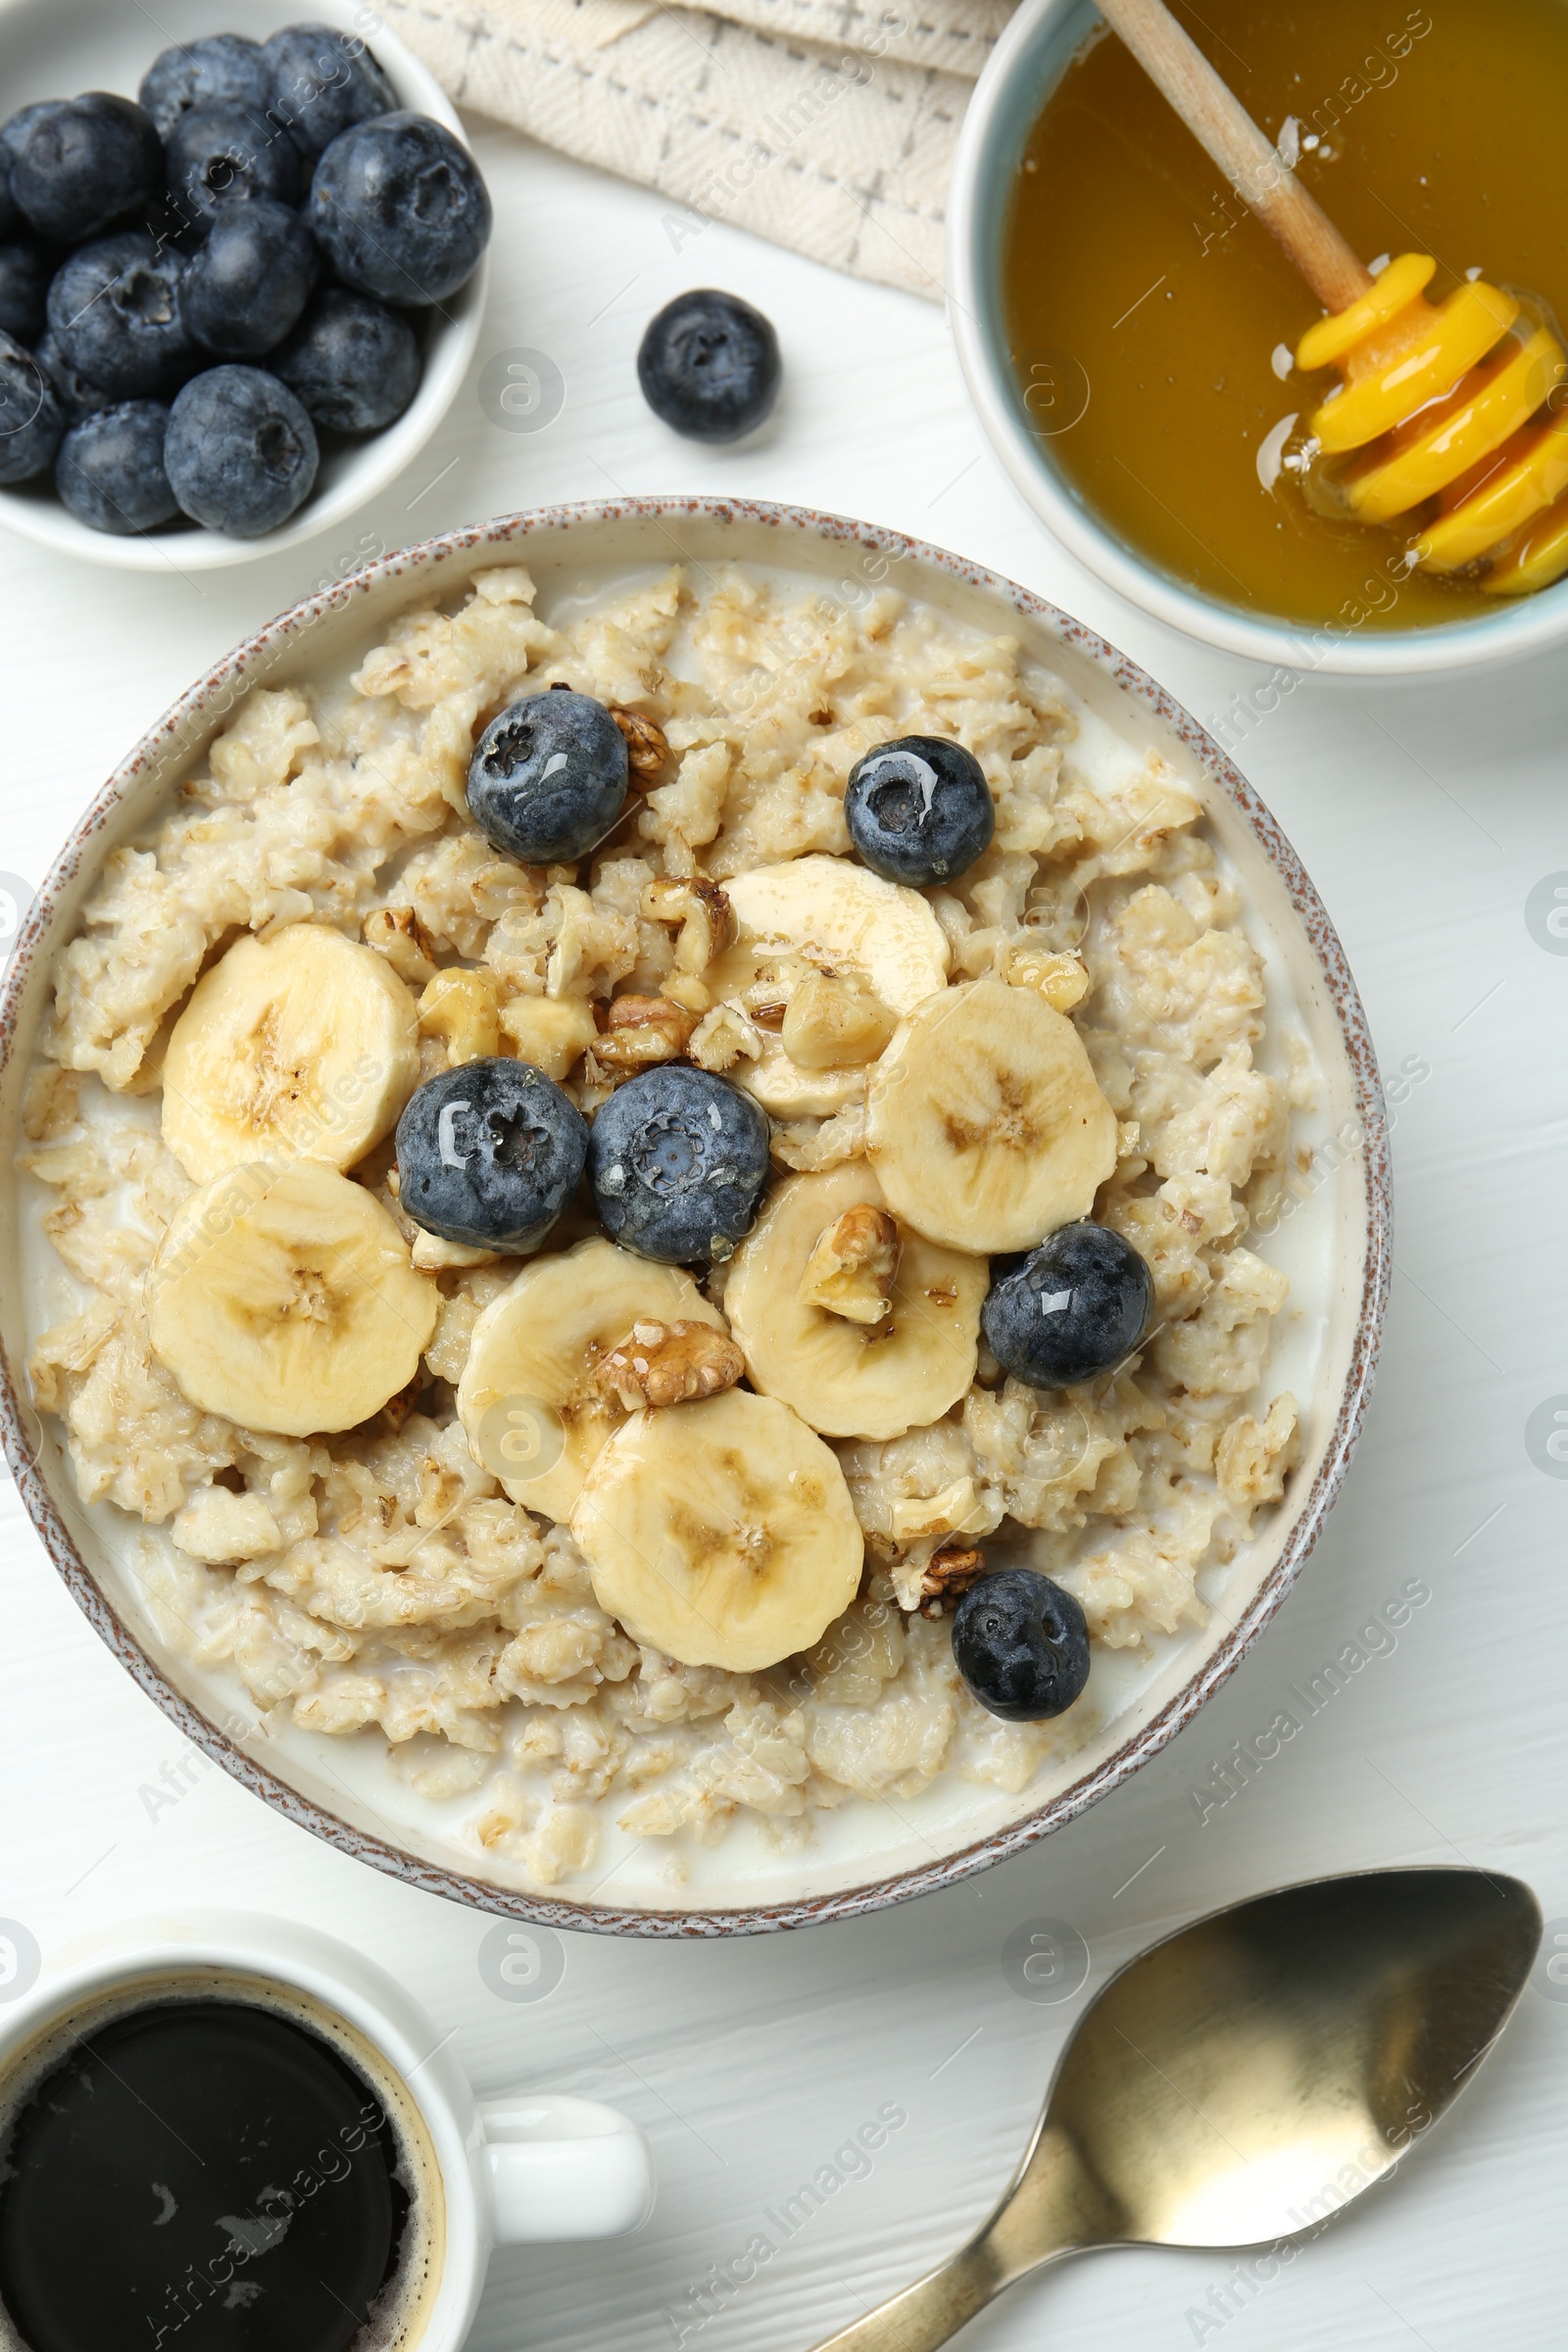 Photo of Tasty oatmeal with banana, blueberries, walnuts and honey served in bowl on white wooden table, flat lay